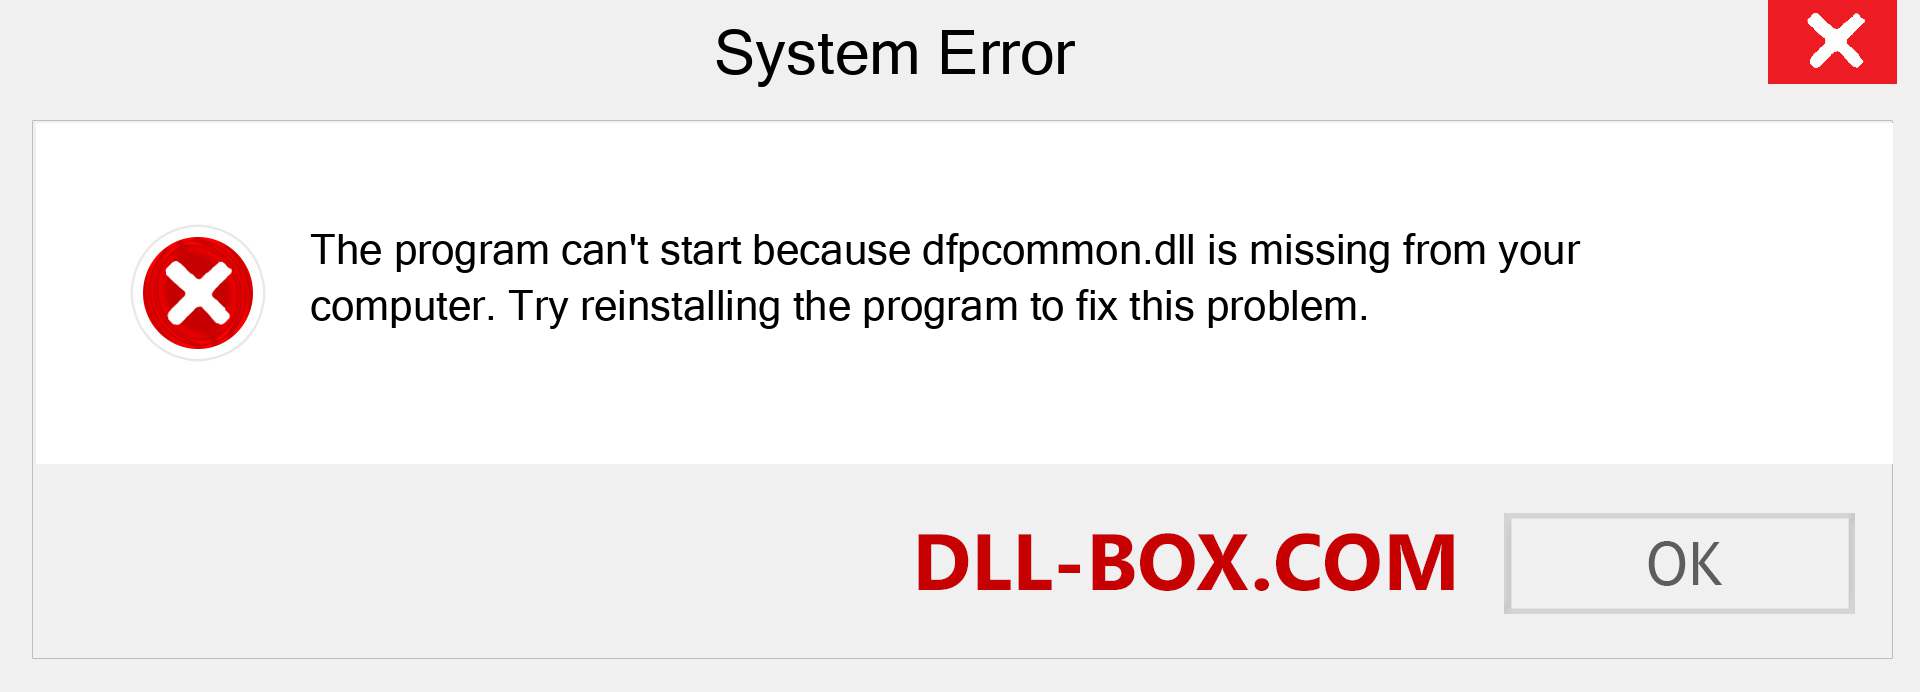  dfpcommon.dll file is missing?. Download for Windows 7, 8, 10 - Fix  dfpcommon dll Missing Error on Windows, photos, images